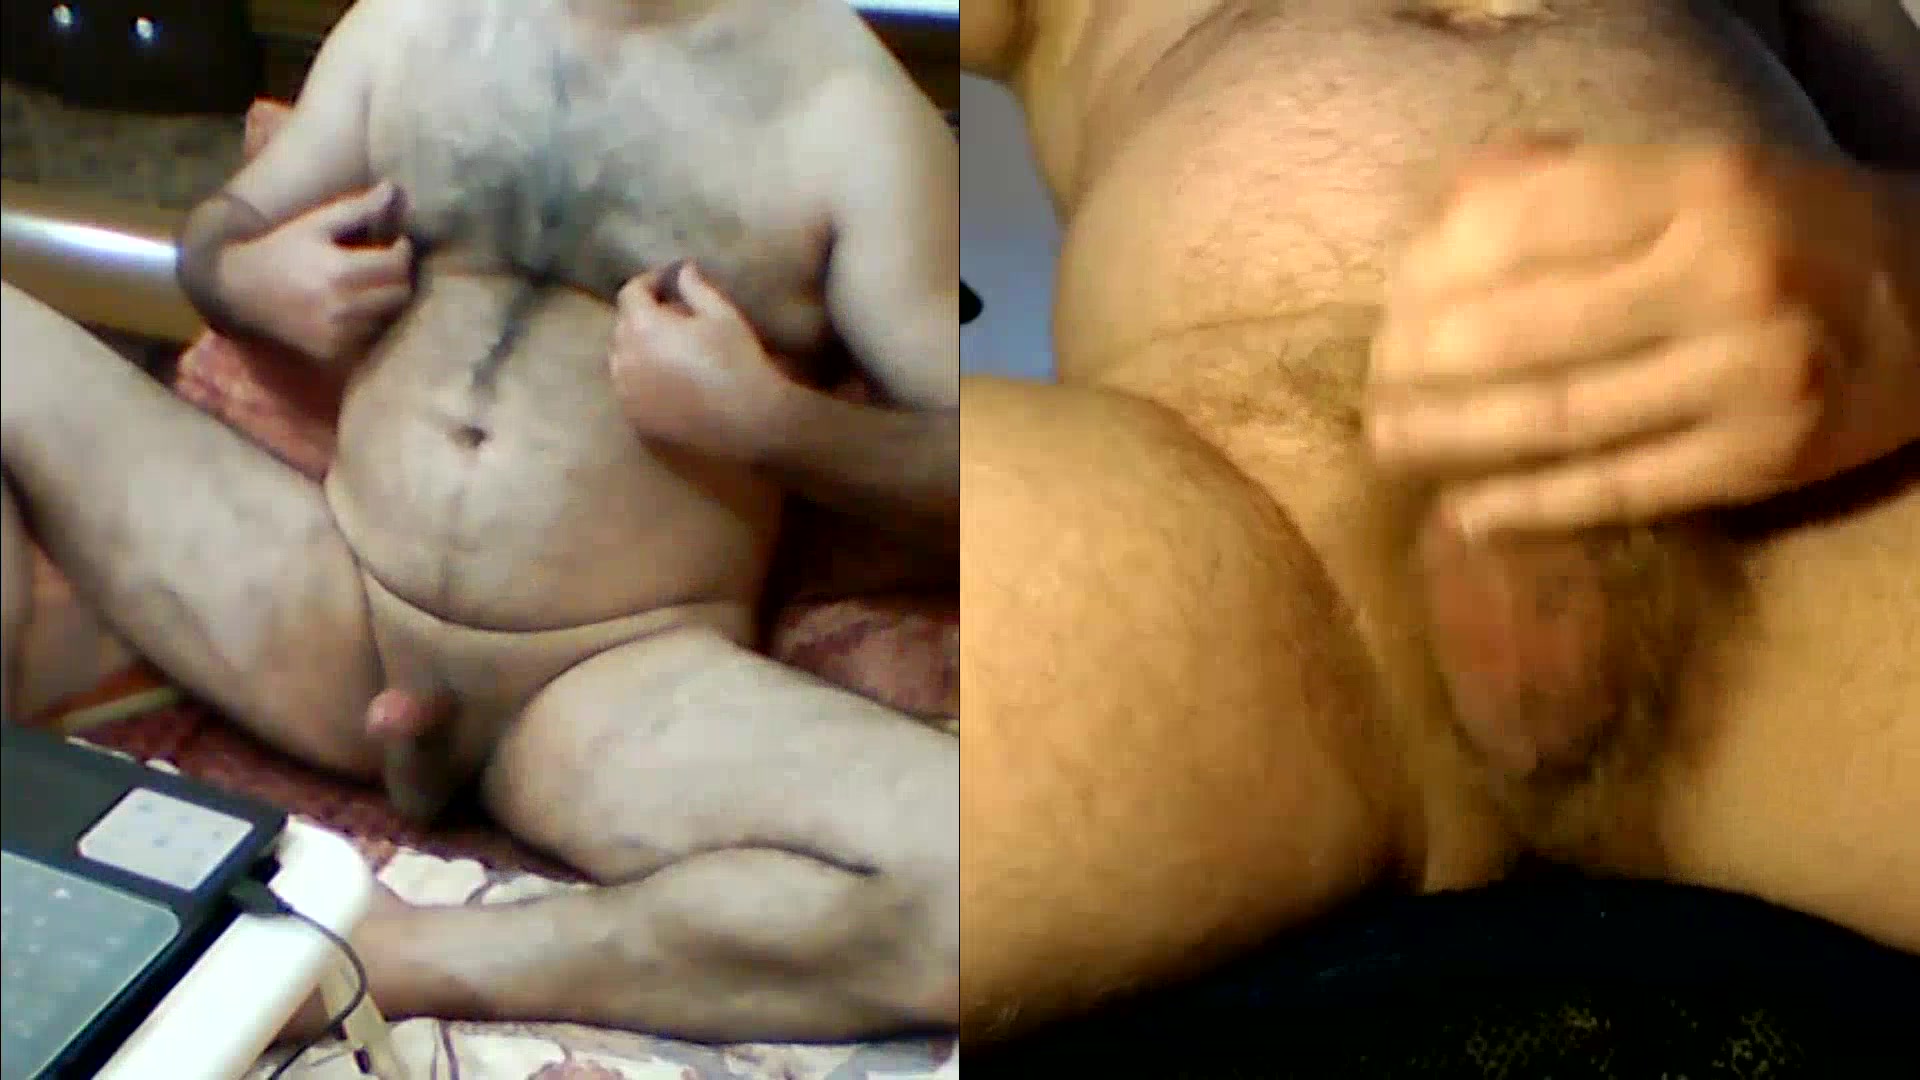 Cock Stroking And Butt Plug On Skype.